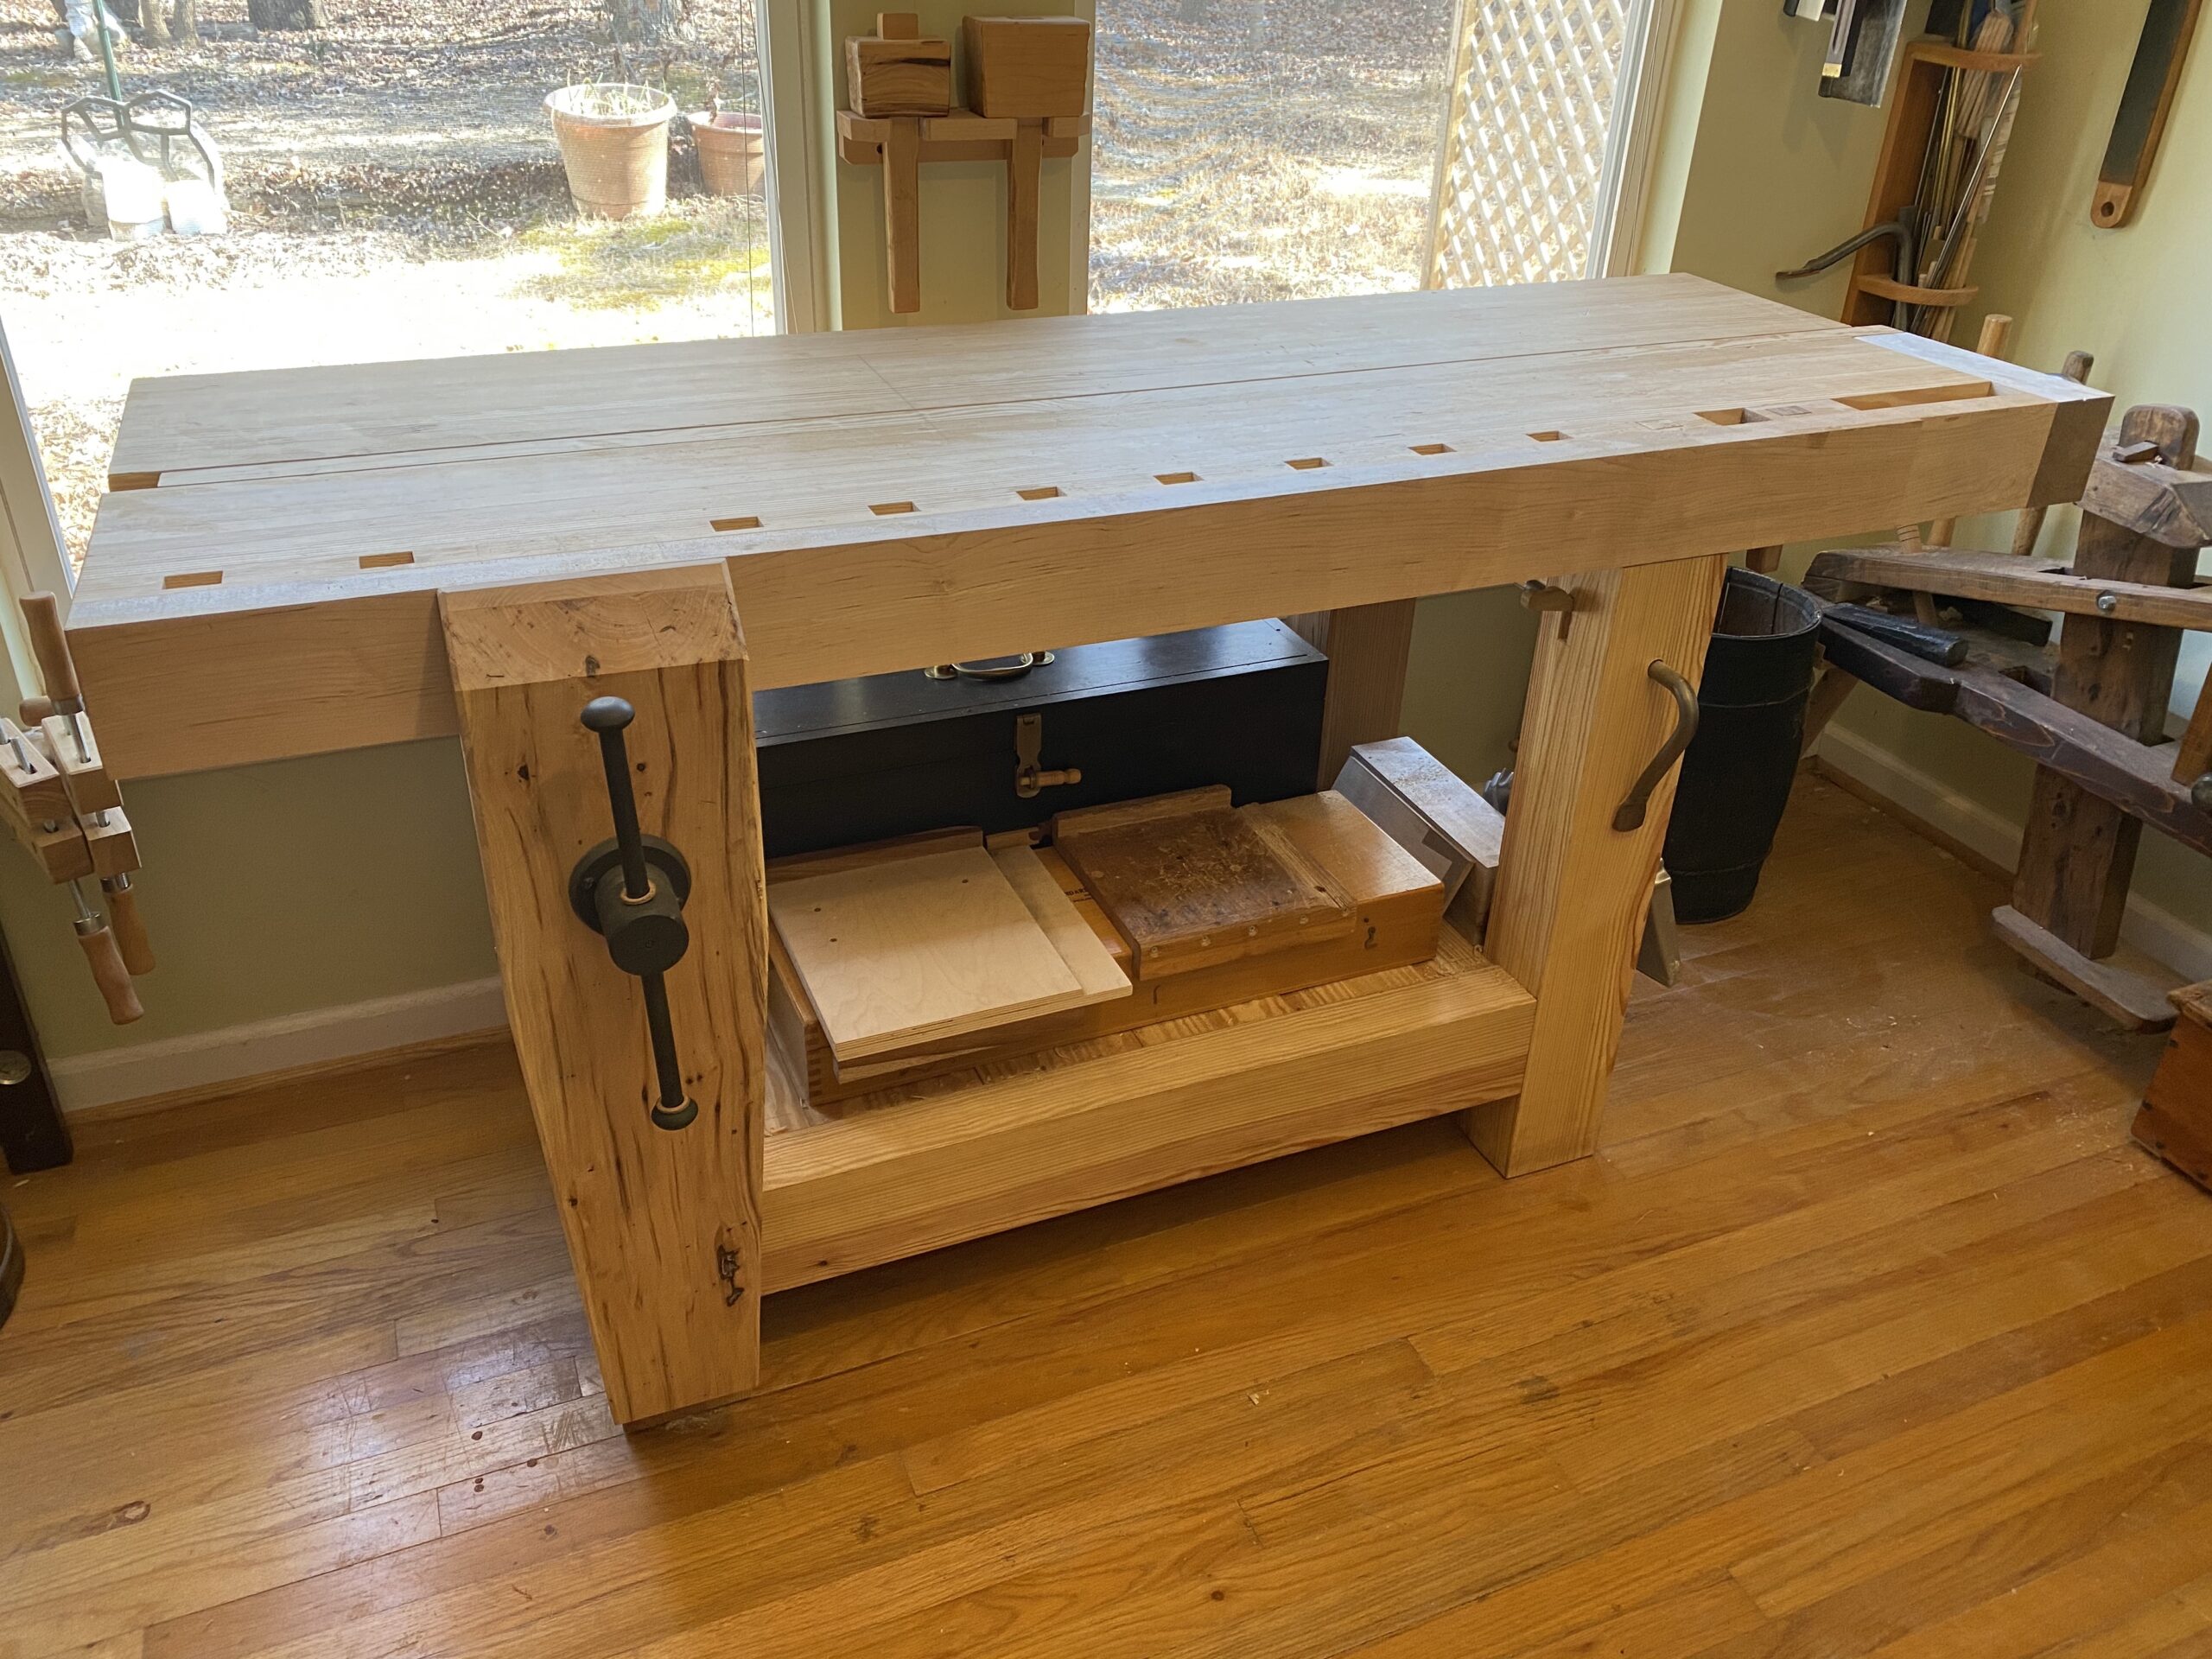 Workbench built by Andreas A.